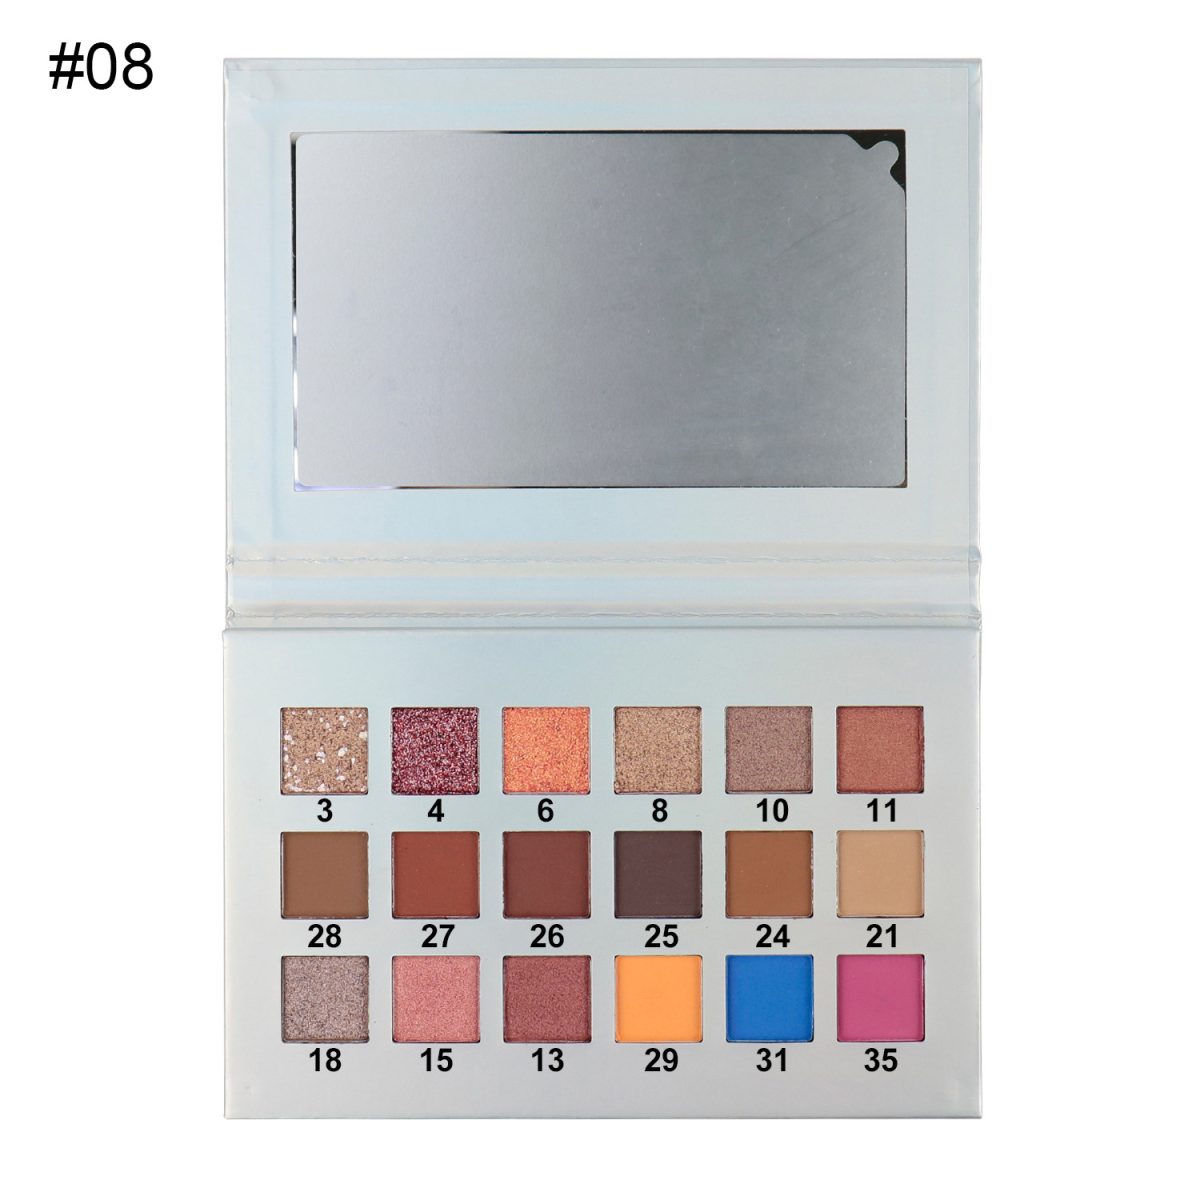 18 Shades Fixed Square Pan Holographic Eyeshadow Palette 2